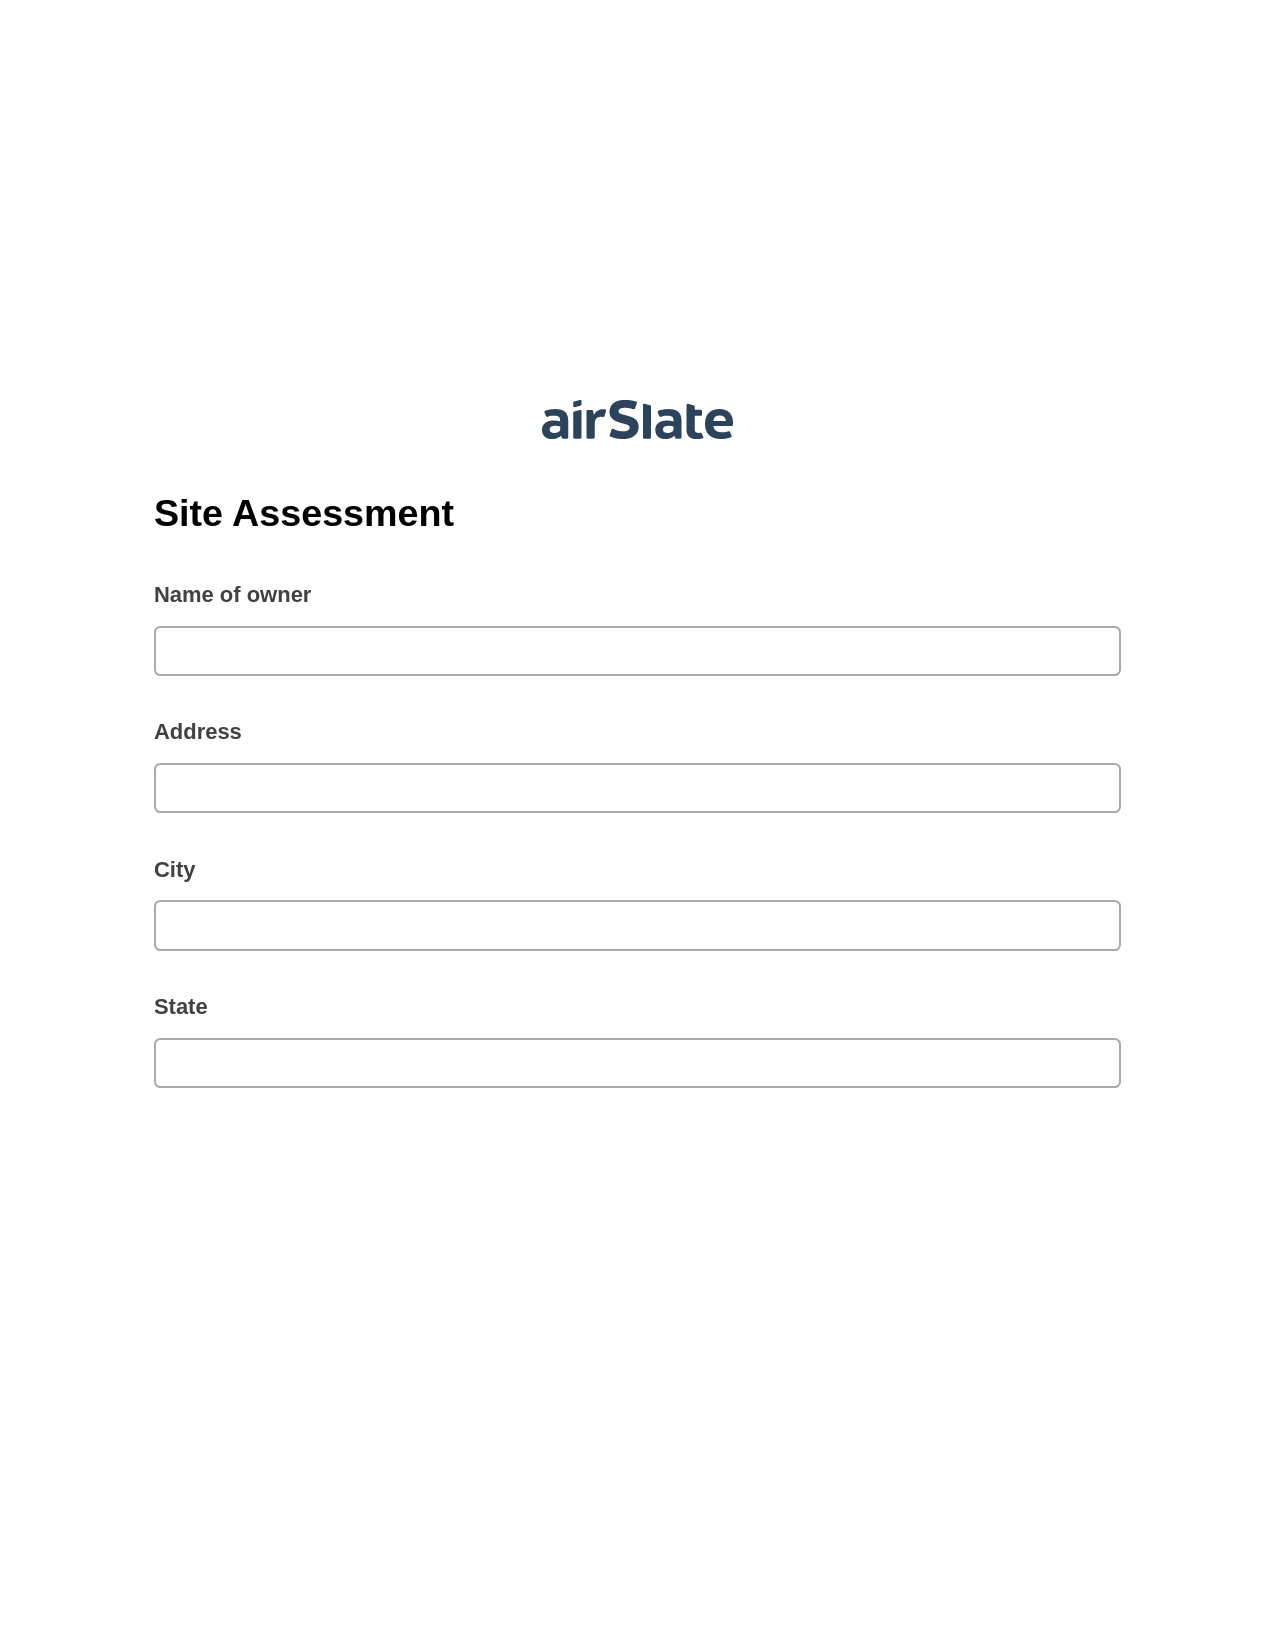 Multirole Site Assessment Pre-fill from Google Sheet Dropdown Options Bot, Create slate from another Flow Bot, Email Notification Postfinish Bot